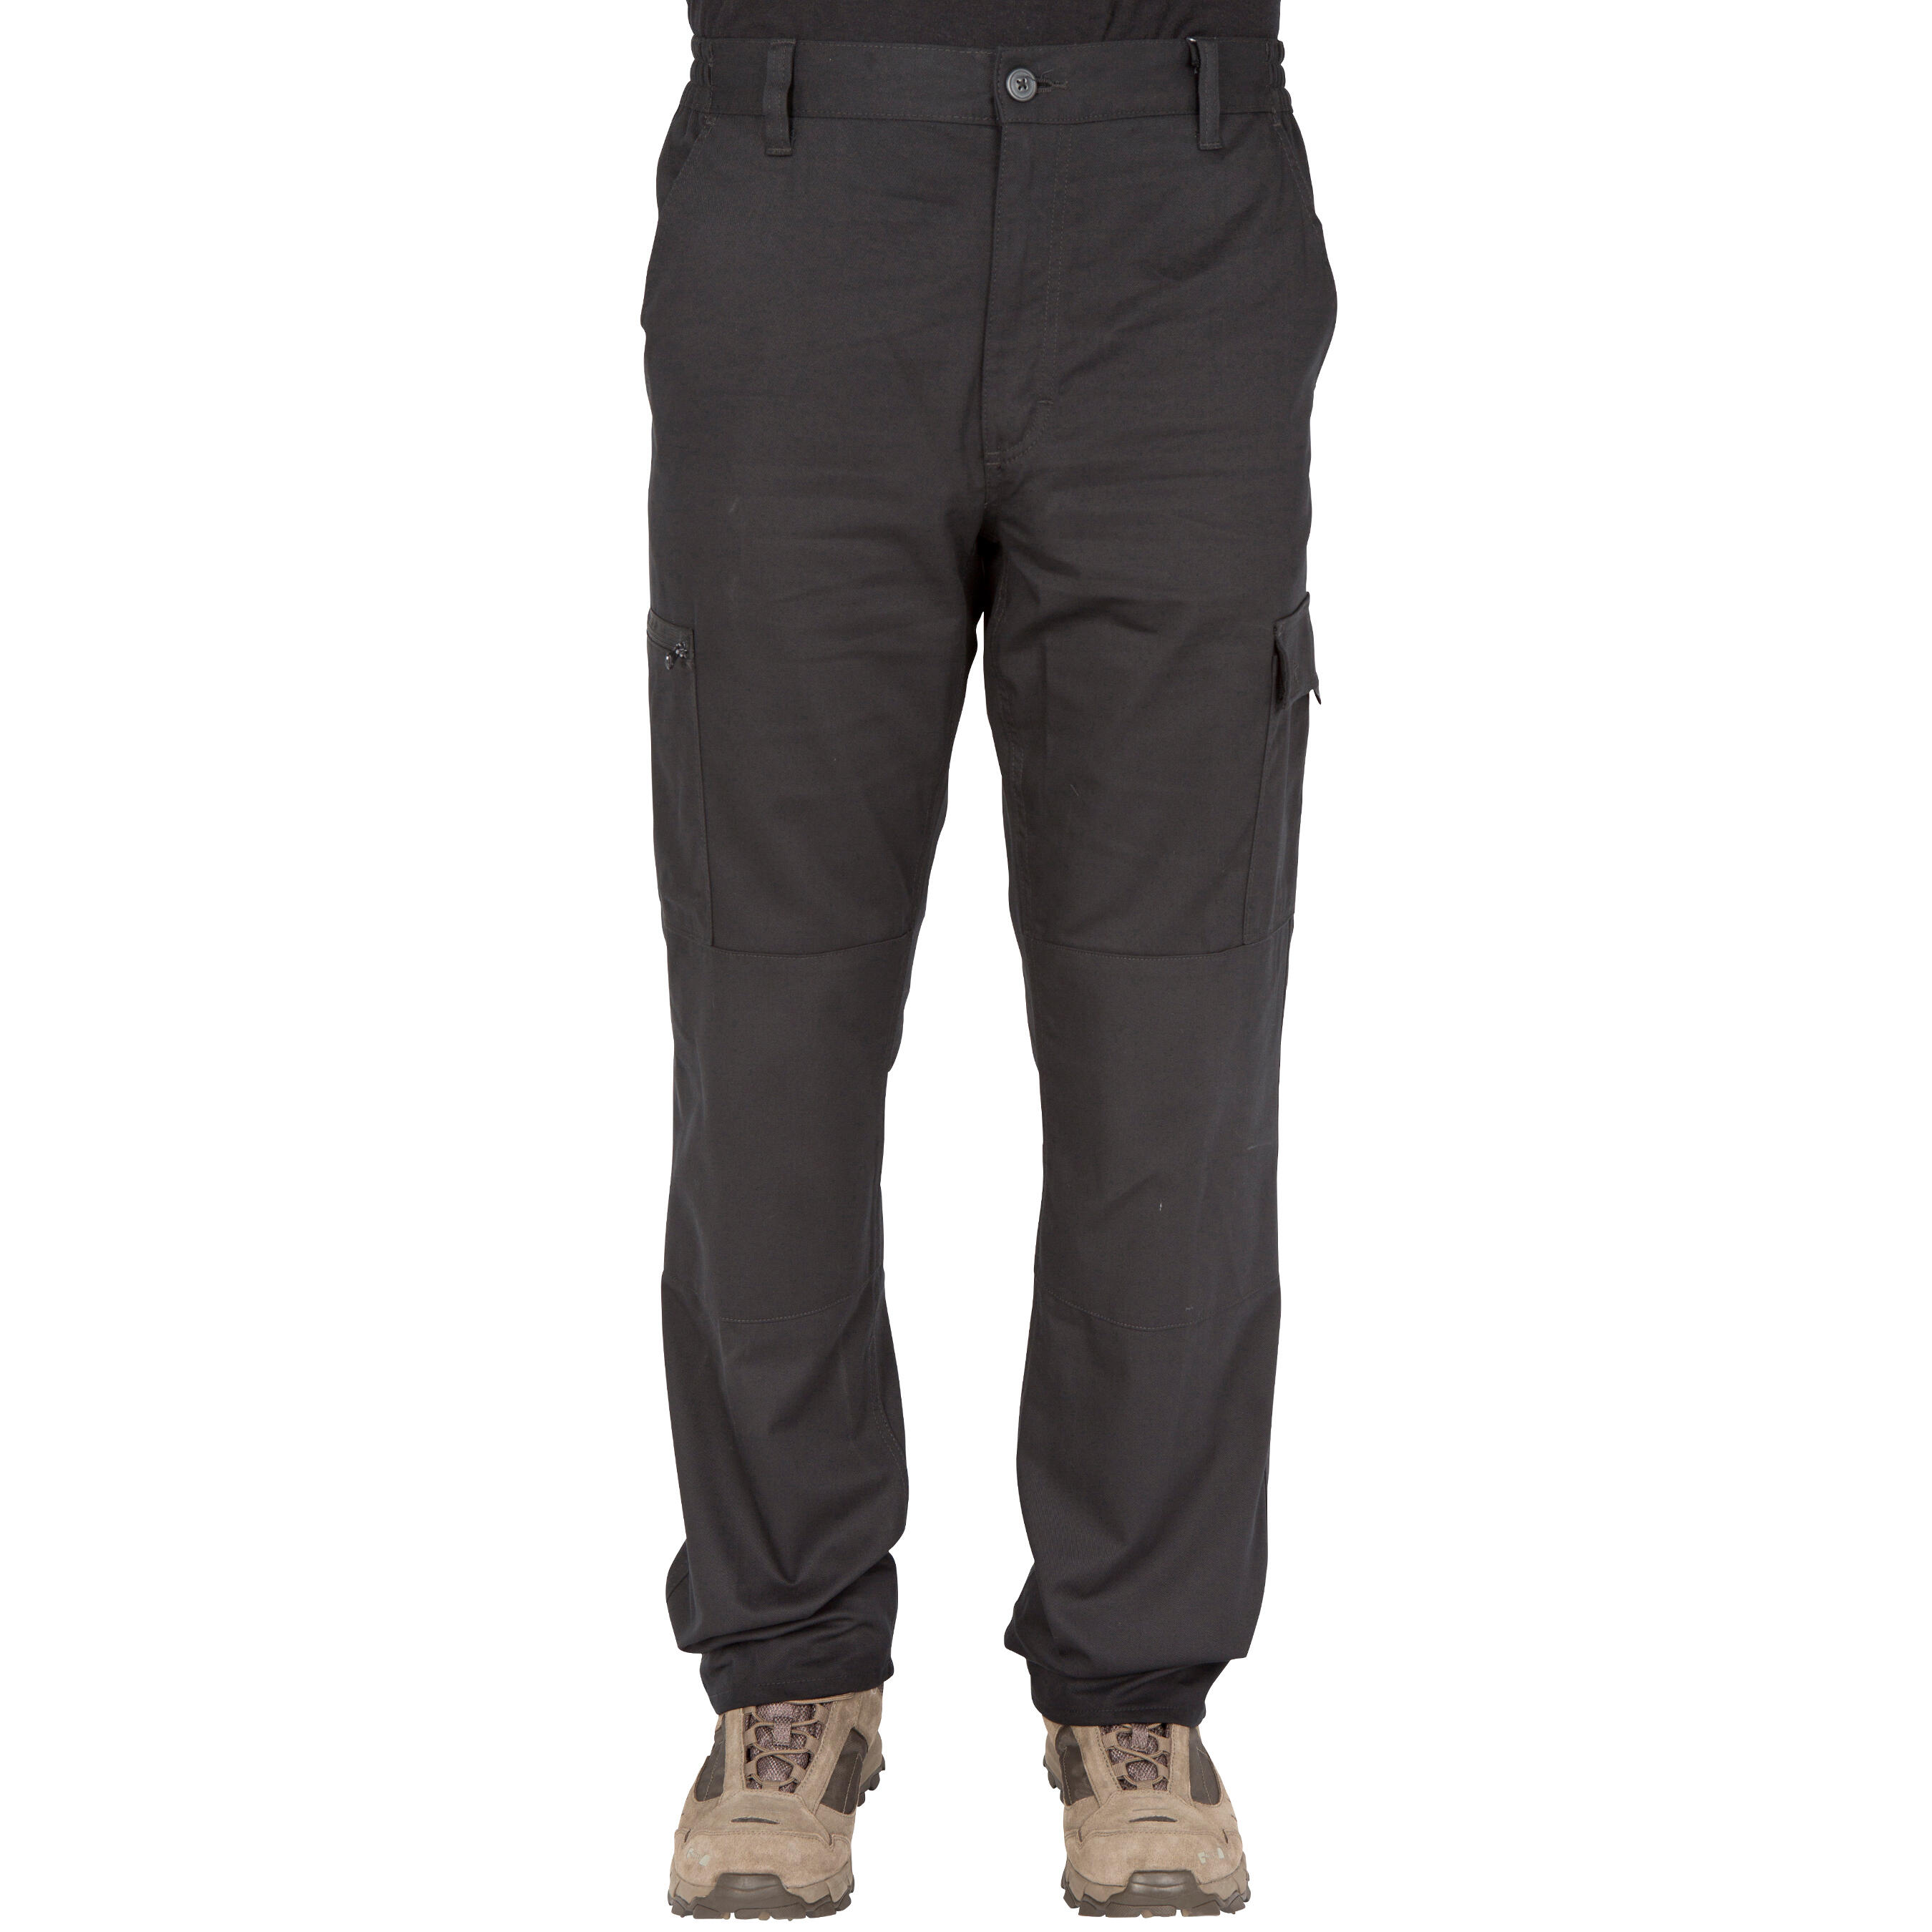 SOLOGNAC Steppe 300 Trousers Newwood  Buy SOLOGNAC Steppe 300 Trousers  Newwood Online at Best Prices in India on Snapdeal